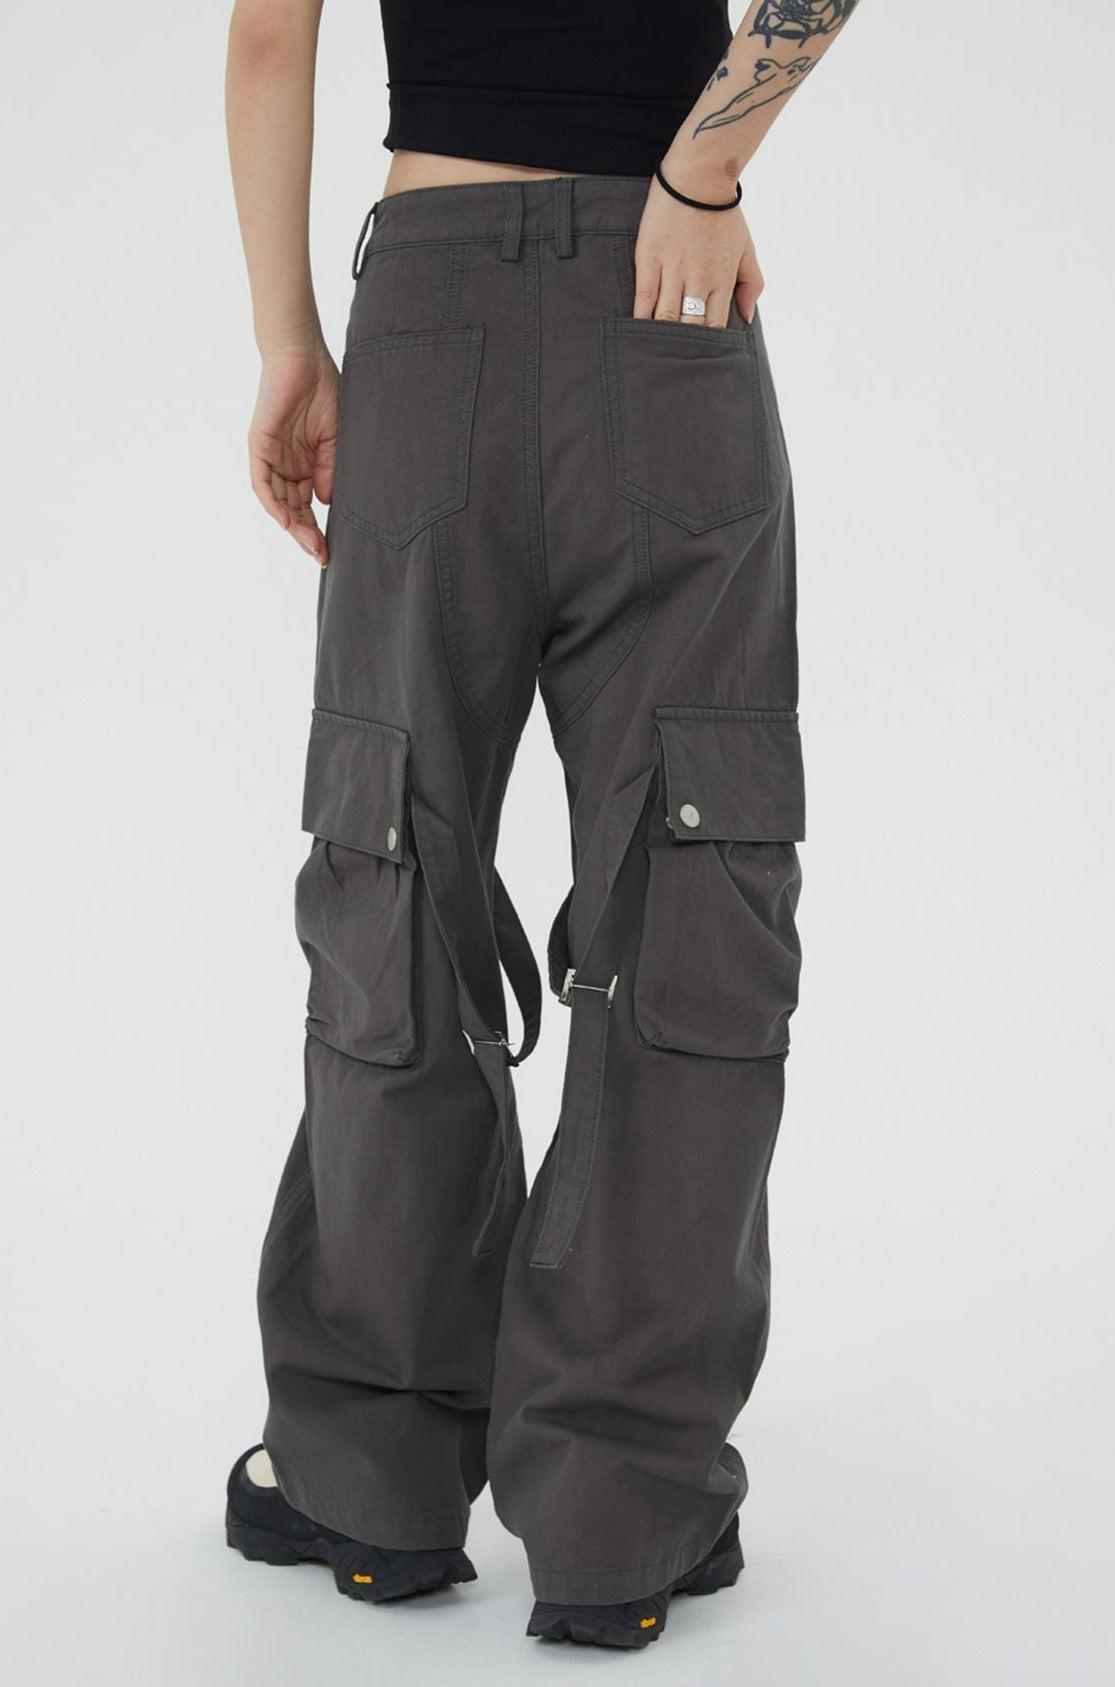 Made Extreme Buckle Strap Button Detailed Cargo Pants Korean Street Fashion Pants By Made Extreme Shop Online at OH Vault